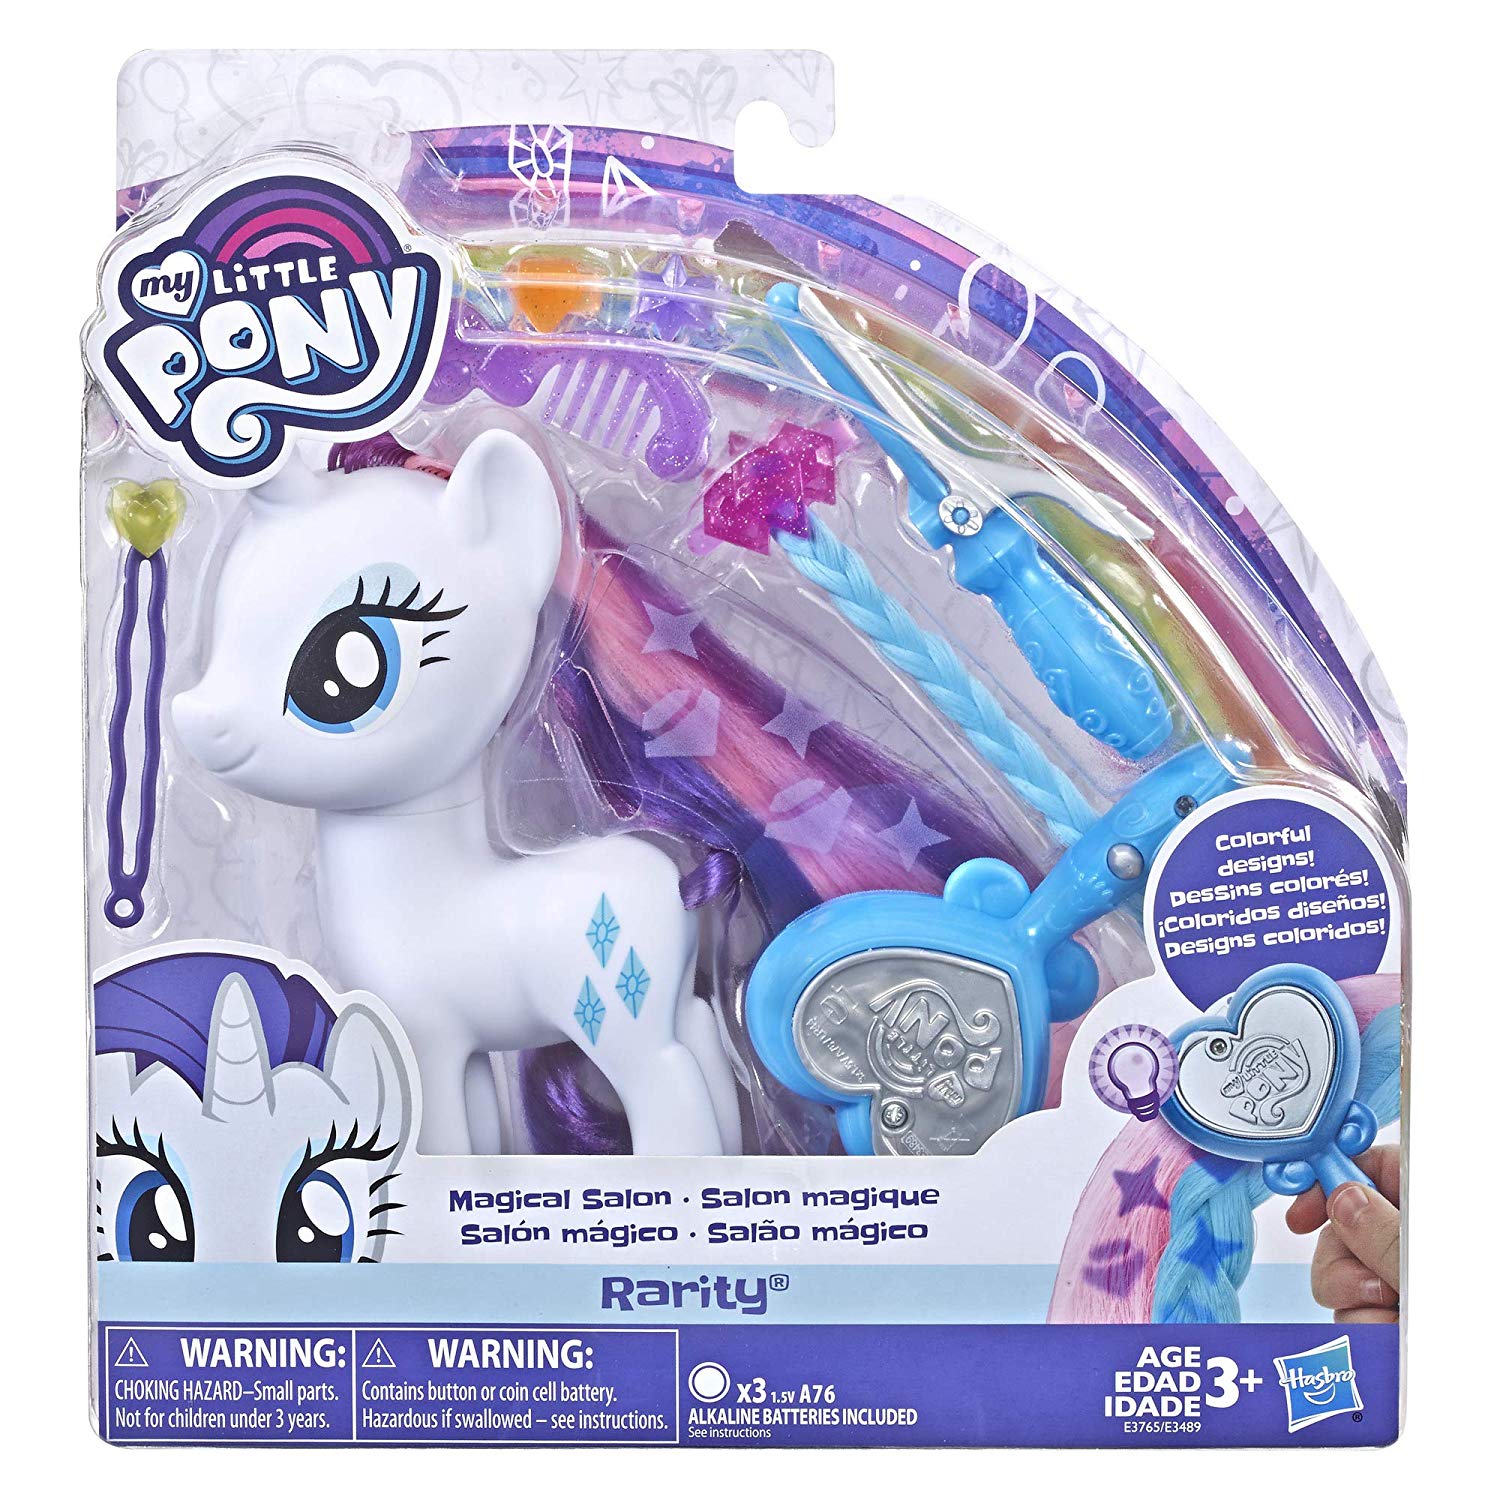 My Little Pony MLP G4 Rarity Toy Figure 3"  brushable classic